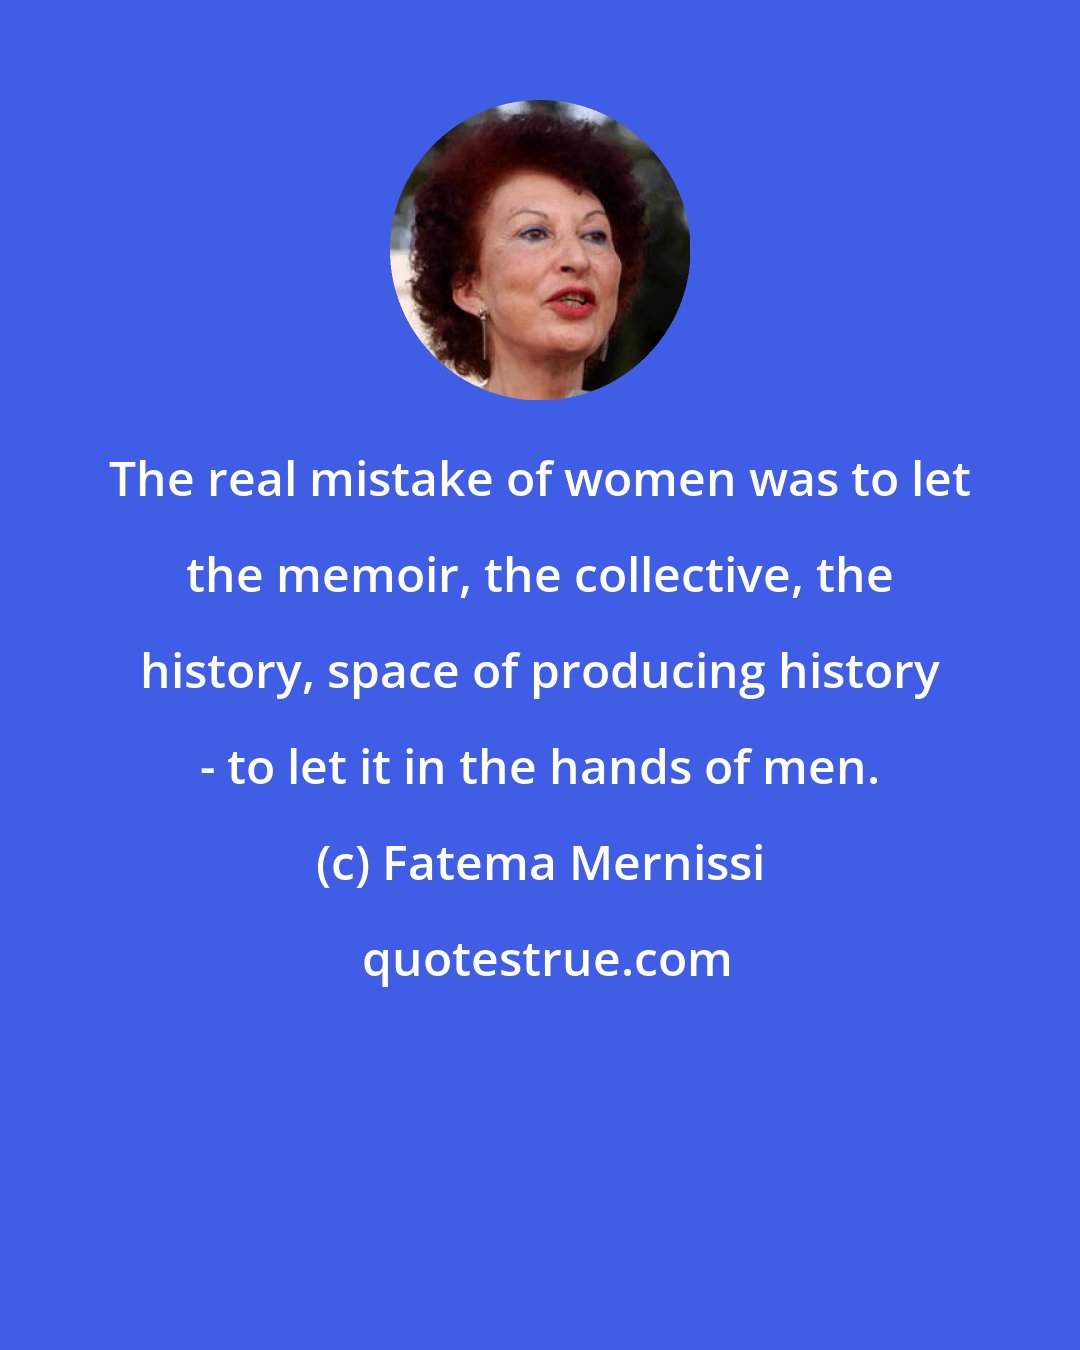 Fatema Mernissi: The real mistake of women was to let the memoir, the collective, the history, space of producing history - to let it in the hands of men.